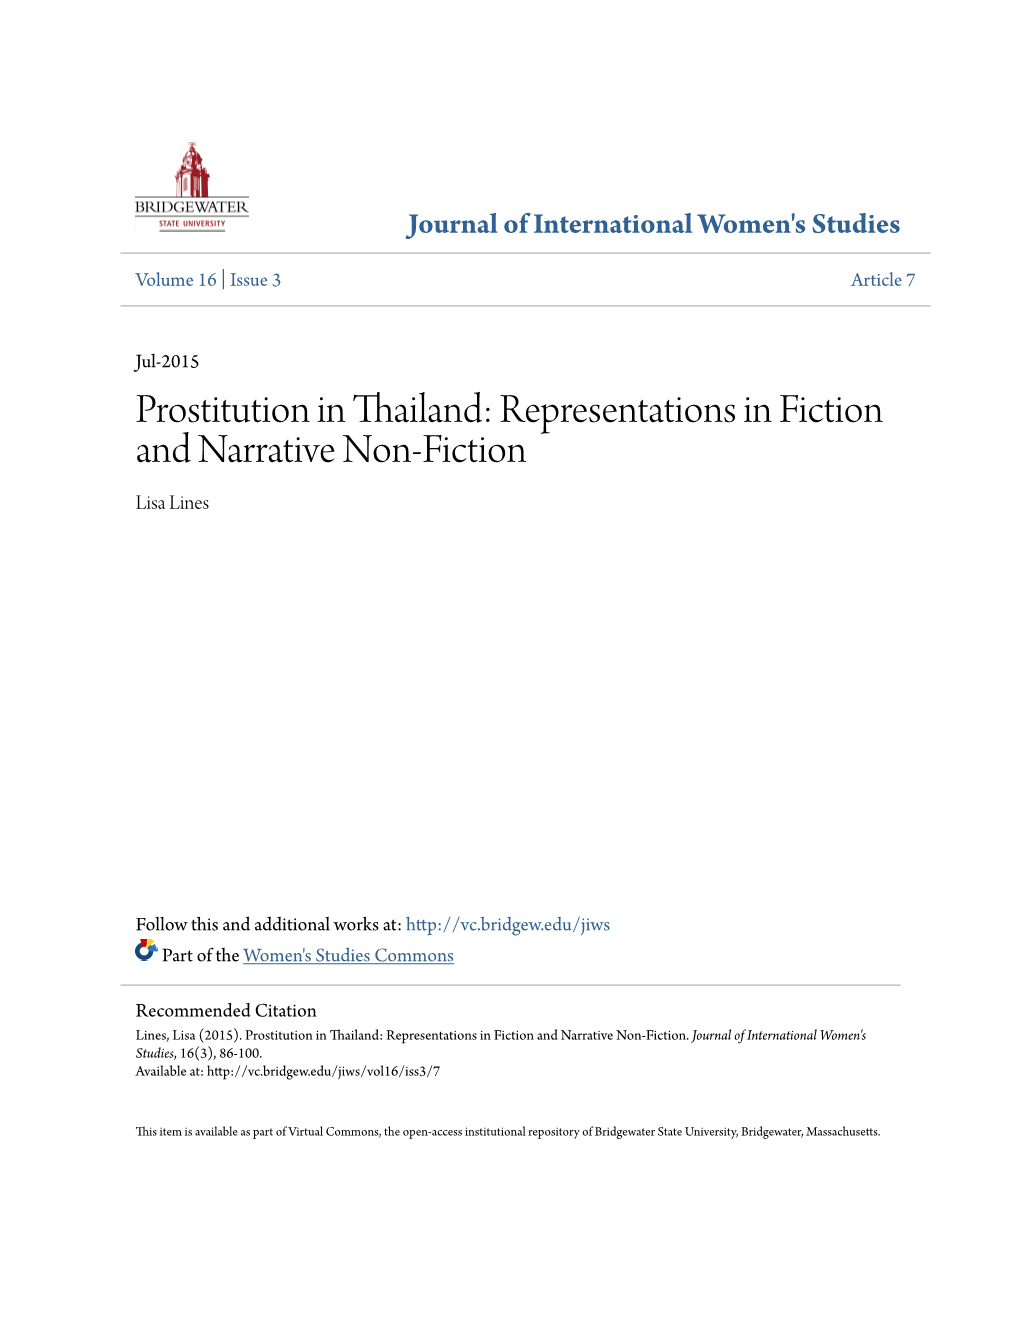 Prostitution in Thailand: Representations in Fiction and Narrative Non-Fiction Lisa Lines